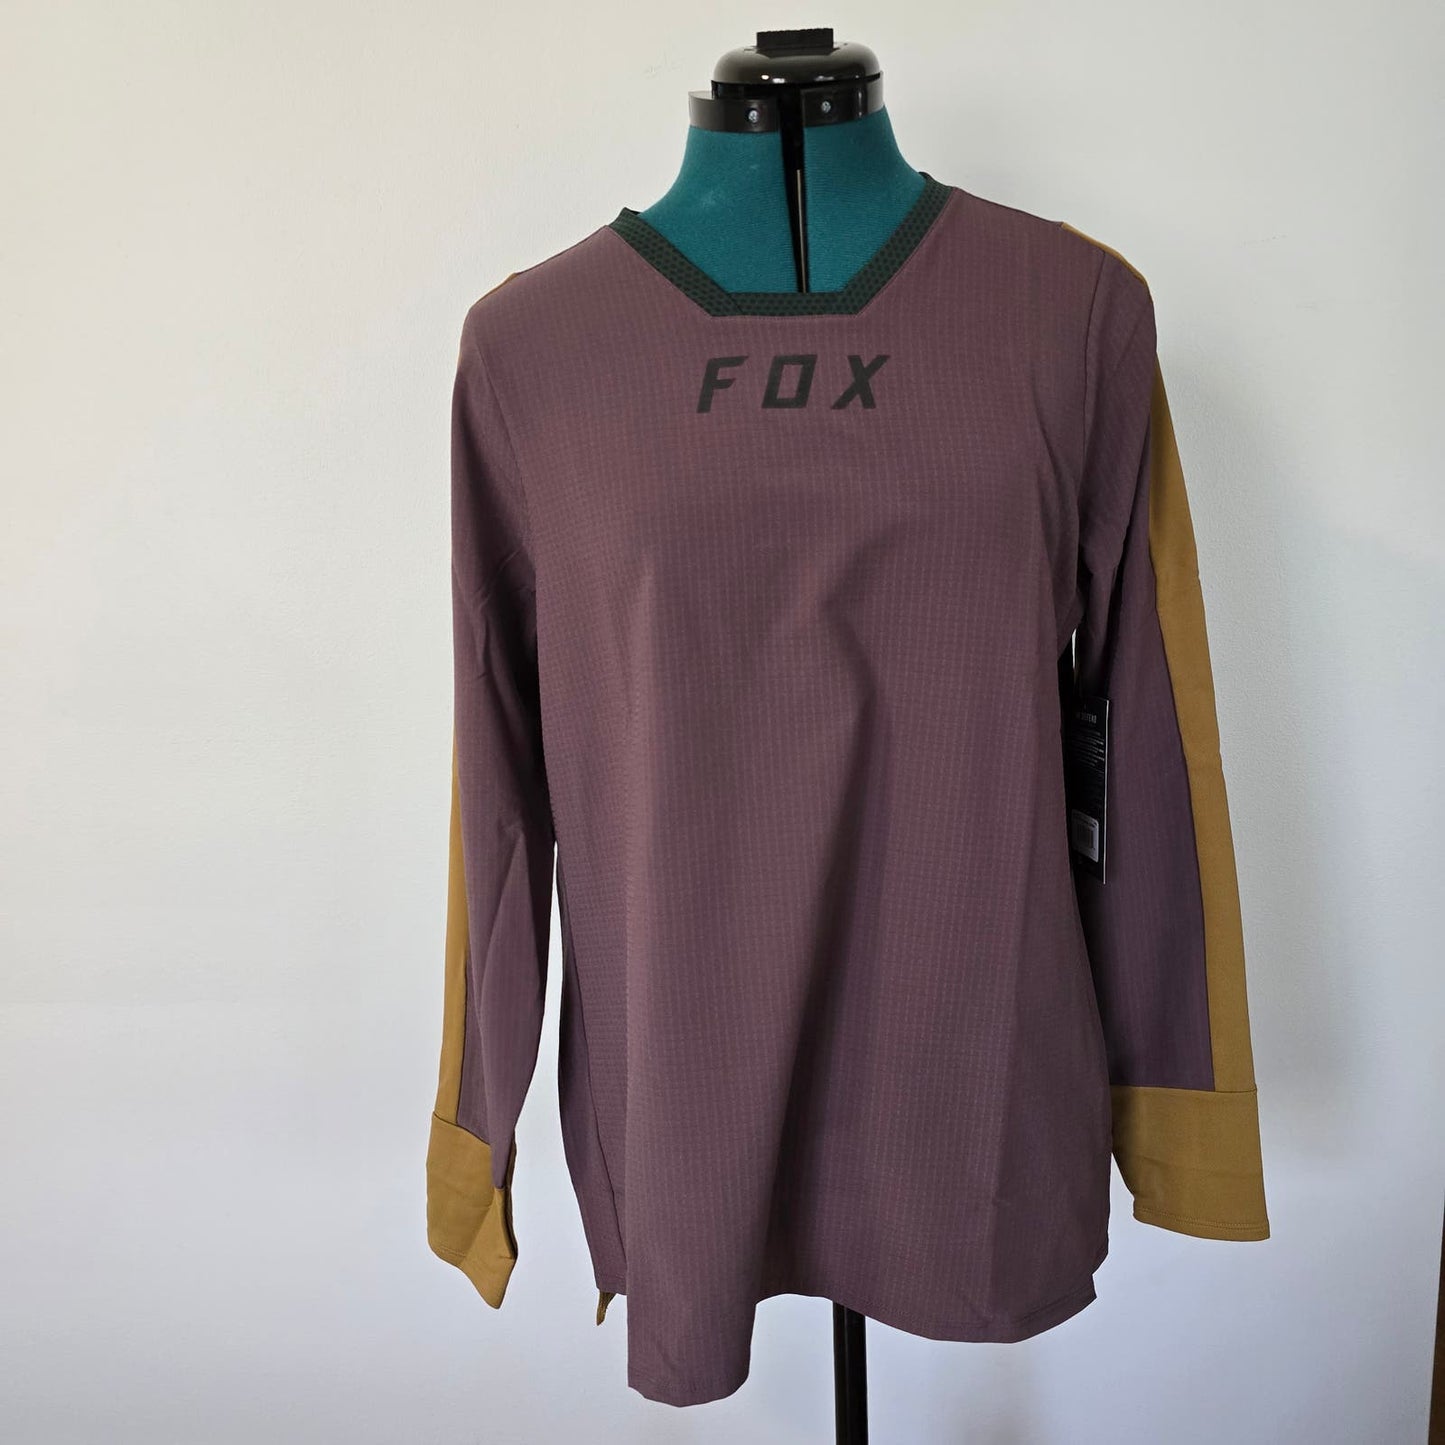 Fox Racing Defend Thermal Jersey - Size Extra Large